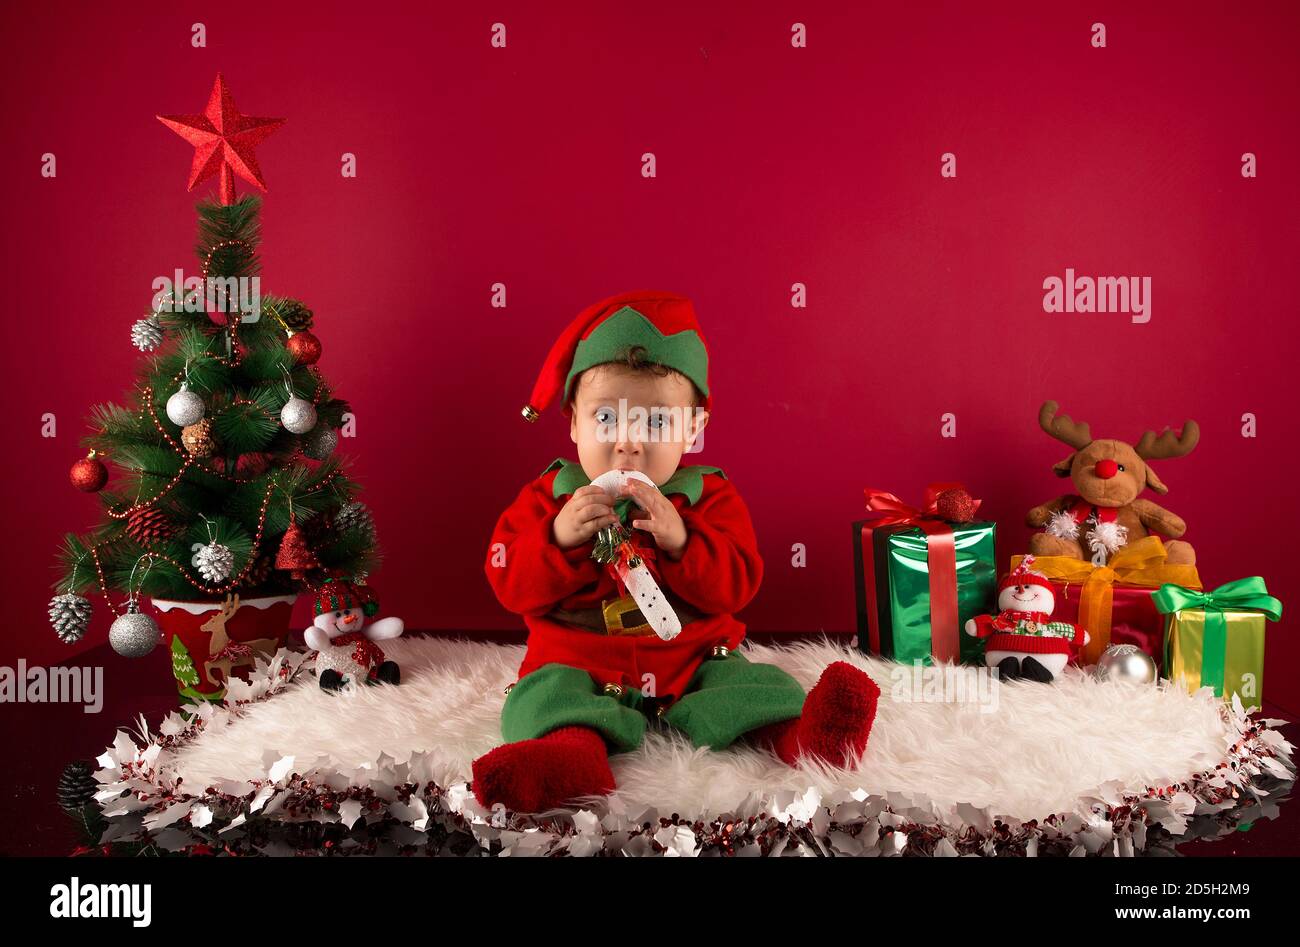 Sweet one-year-old boy dressed as an elf, in Christmas decoration, with gifts and typical tree Stock Photo